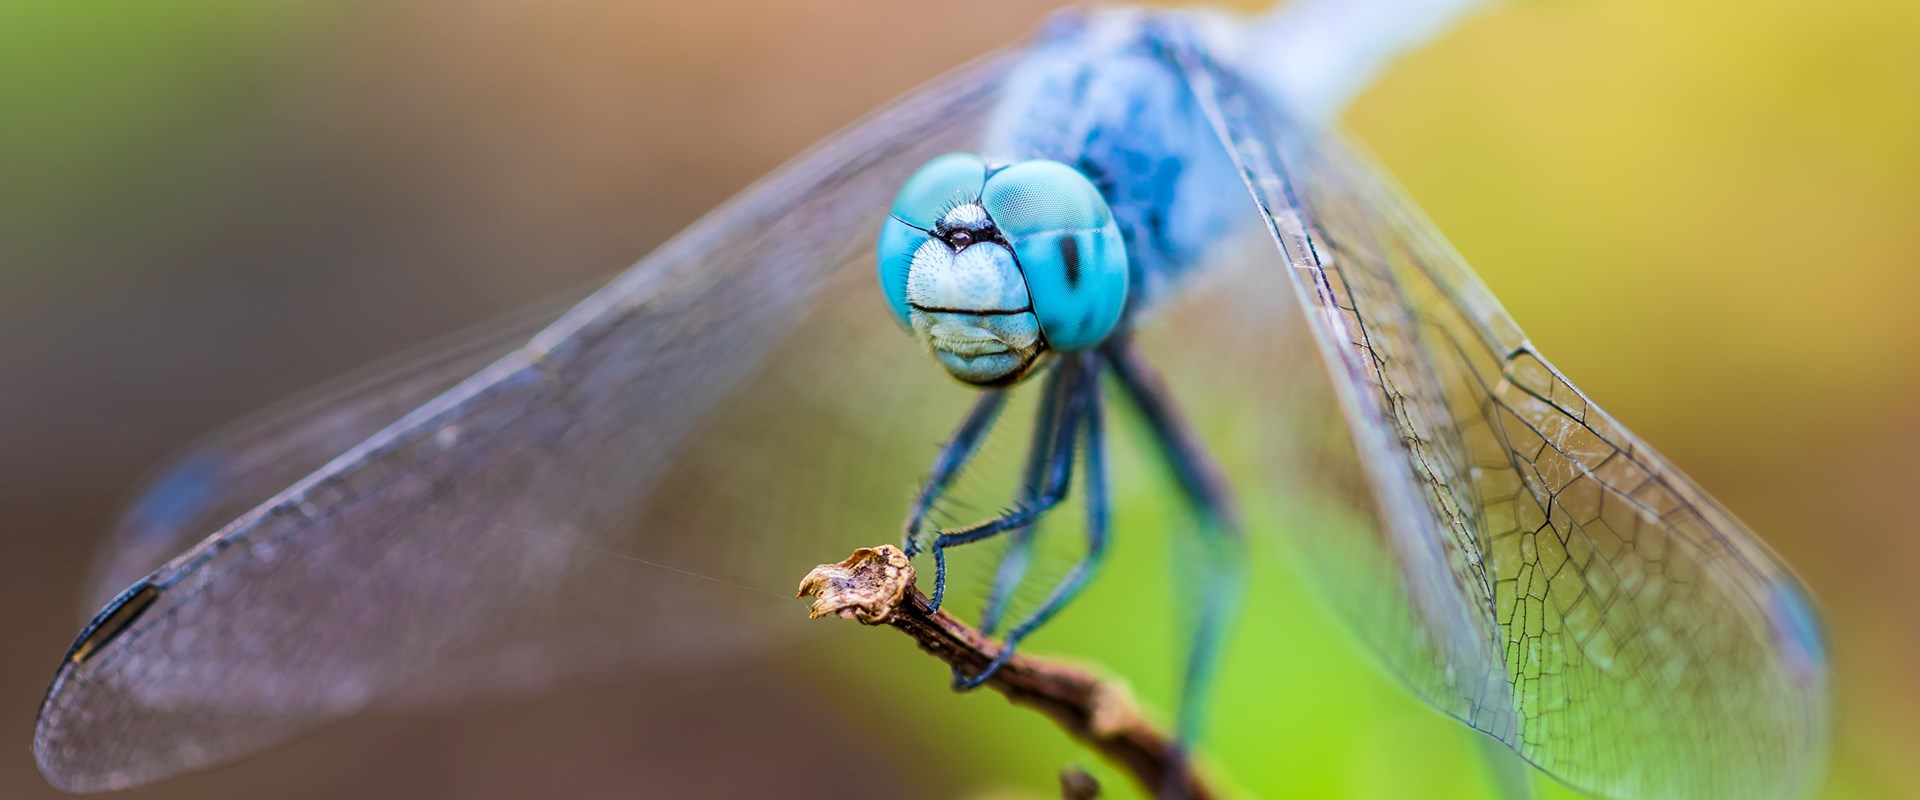 Blue dragonfly on green leaves